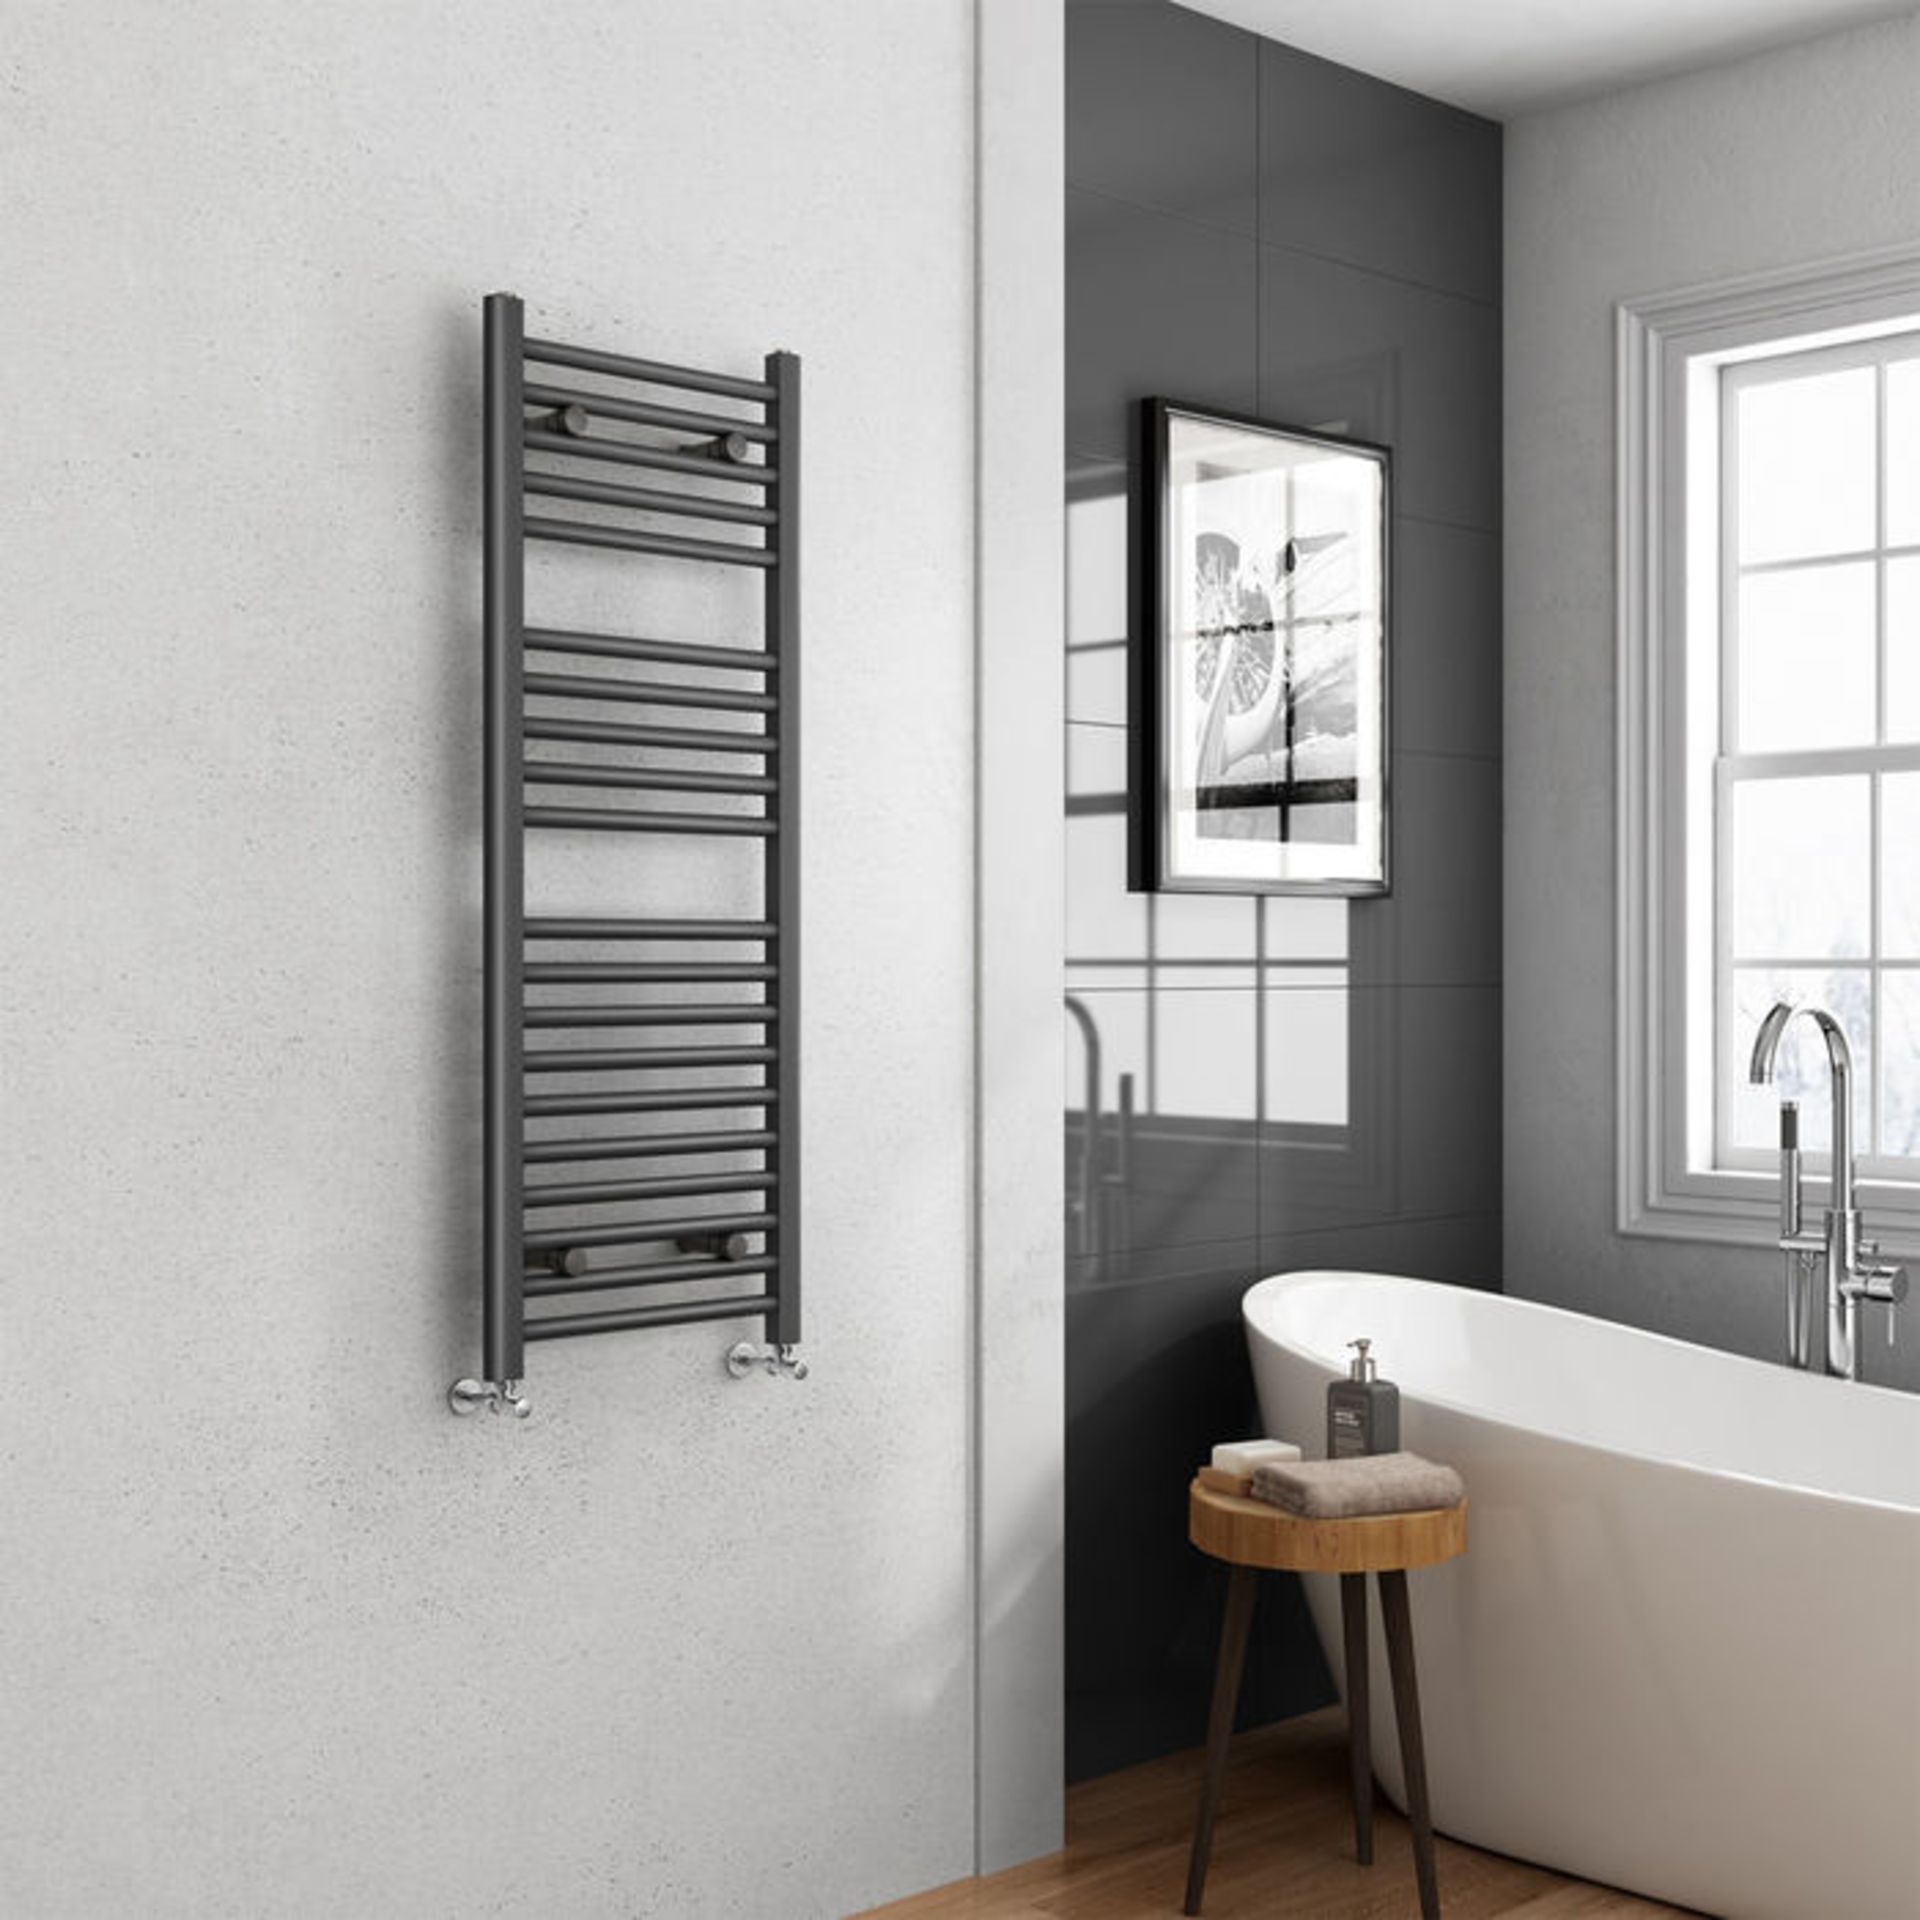 (AL7) 1200x450mm - 25mm Tubes - Anthracite Heated Straight Rail Ladder Towel Radiator. This - Image 2 of 3